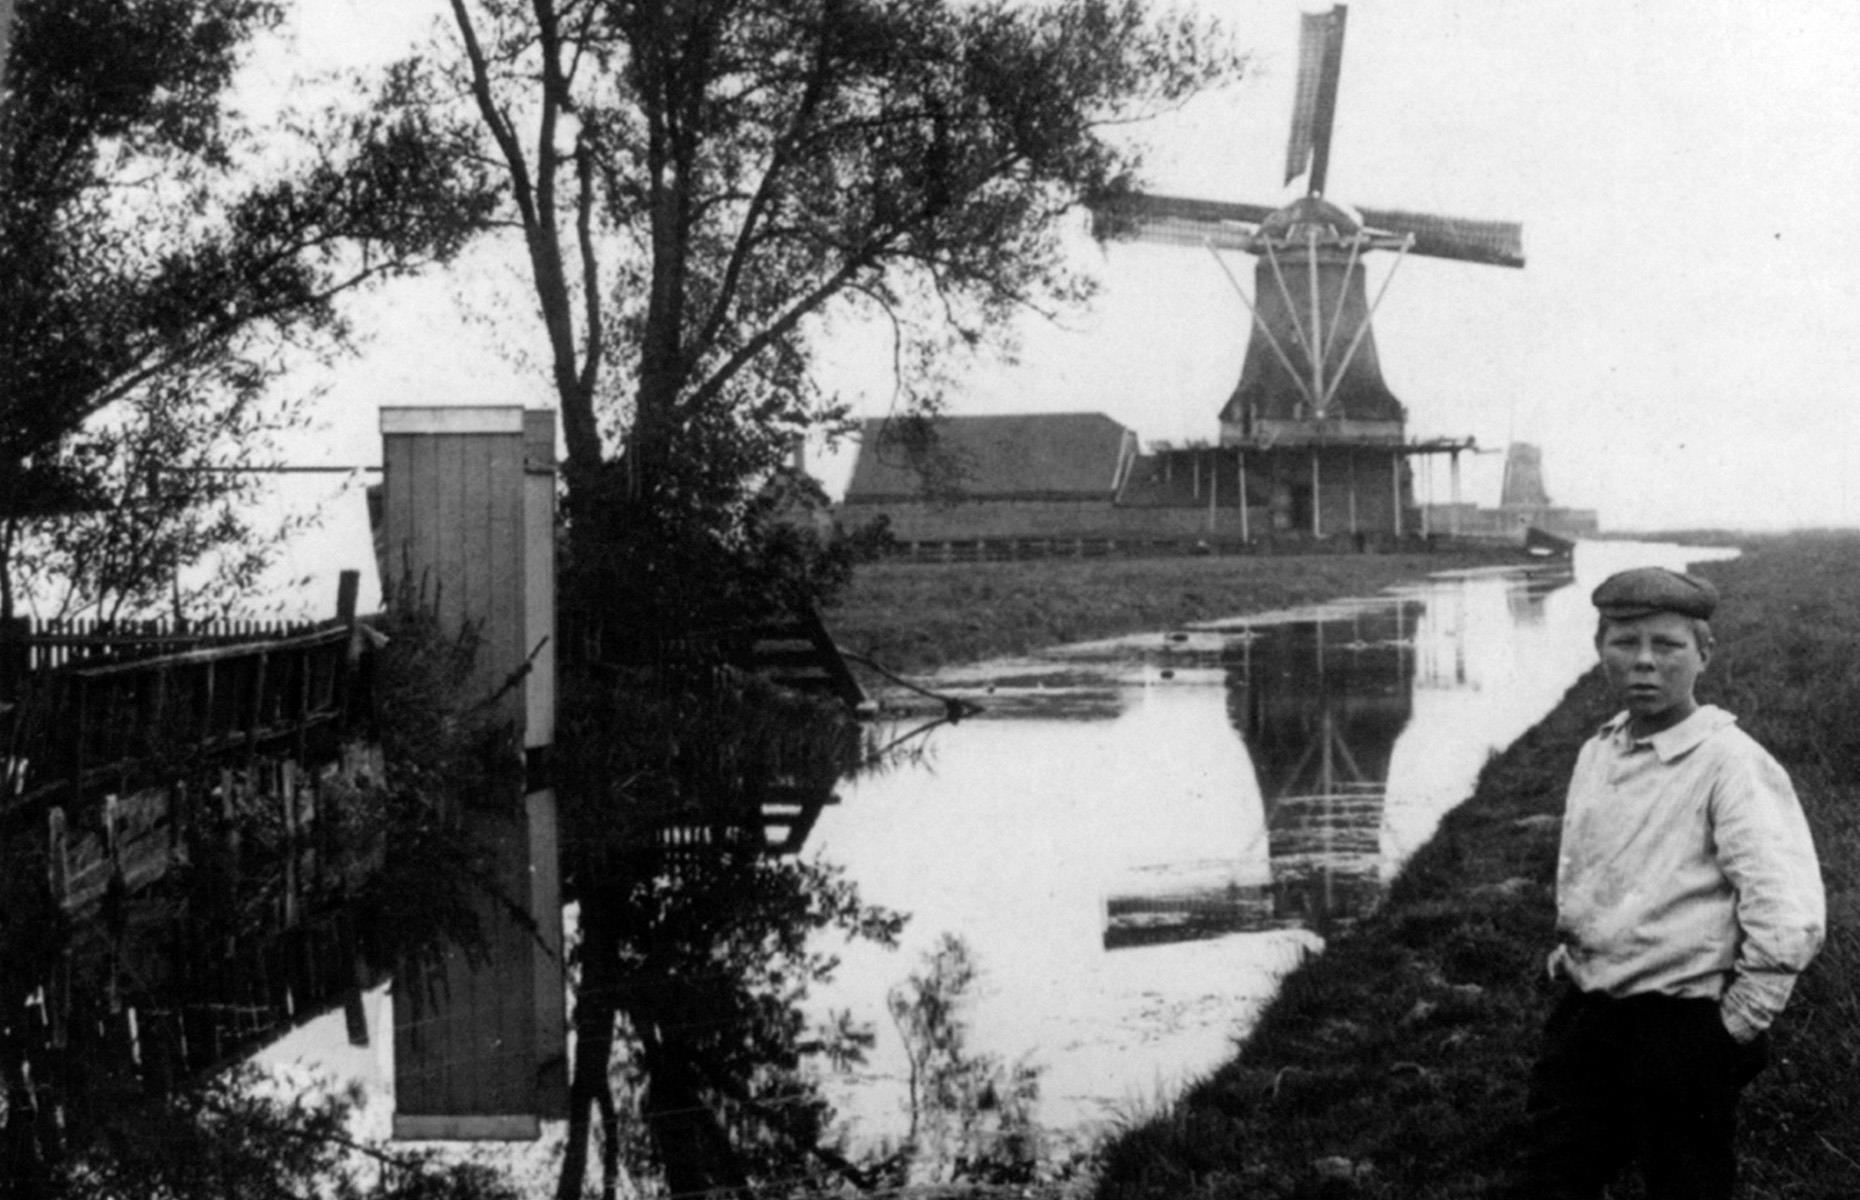 <p>For visitors to rural areas like Zaandijk in Zaanstad, traditional windmills make for an evocative backdrop to their holiday photos, especially if they are surrounded by tulips. But when this photo was taken in 1900, they were used to help control and prevent flooding in the region, pumping water out of the lowlands and back into the rivers beyond the dikes so that workers like this young lad could farm the land.</p>